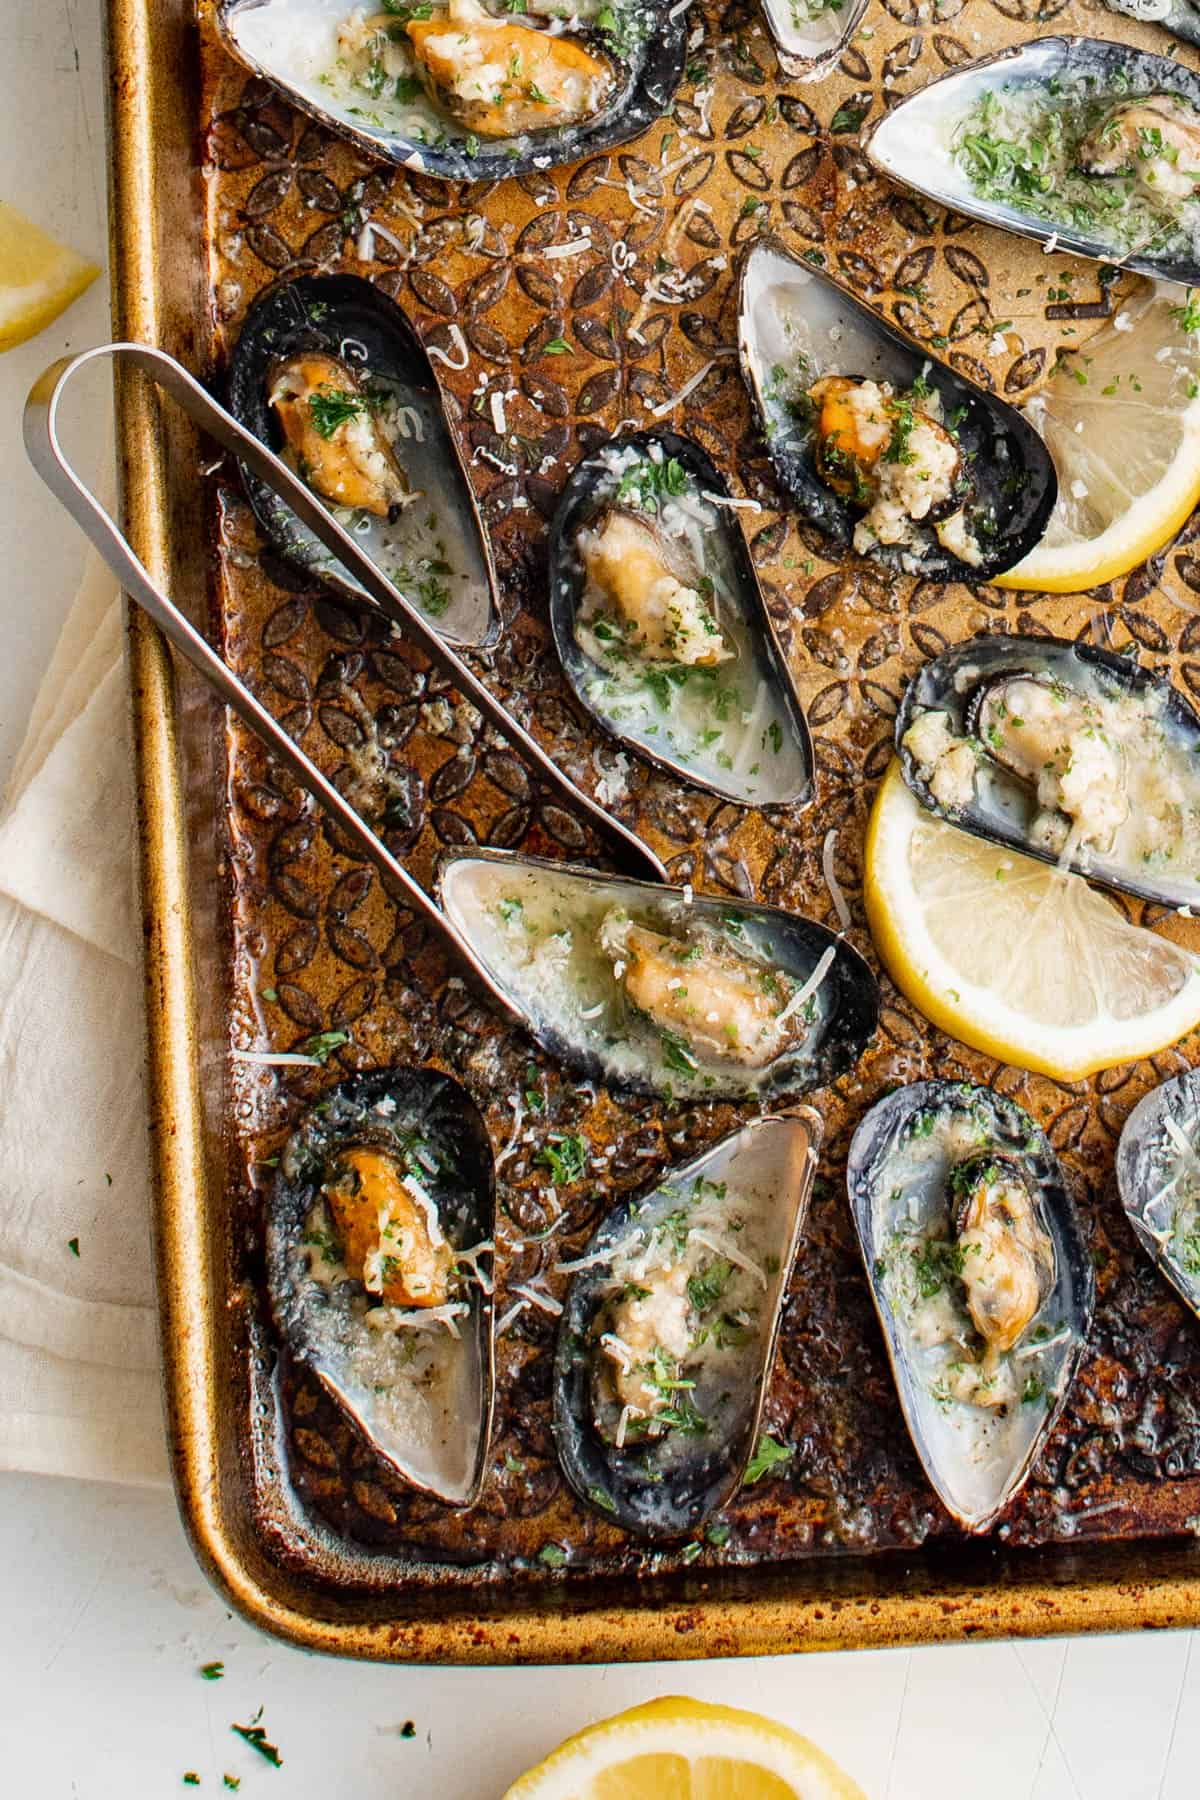 Baked mussels in garlic butter on a sheet pan with tongs for serving,